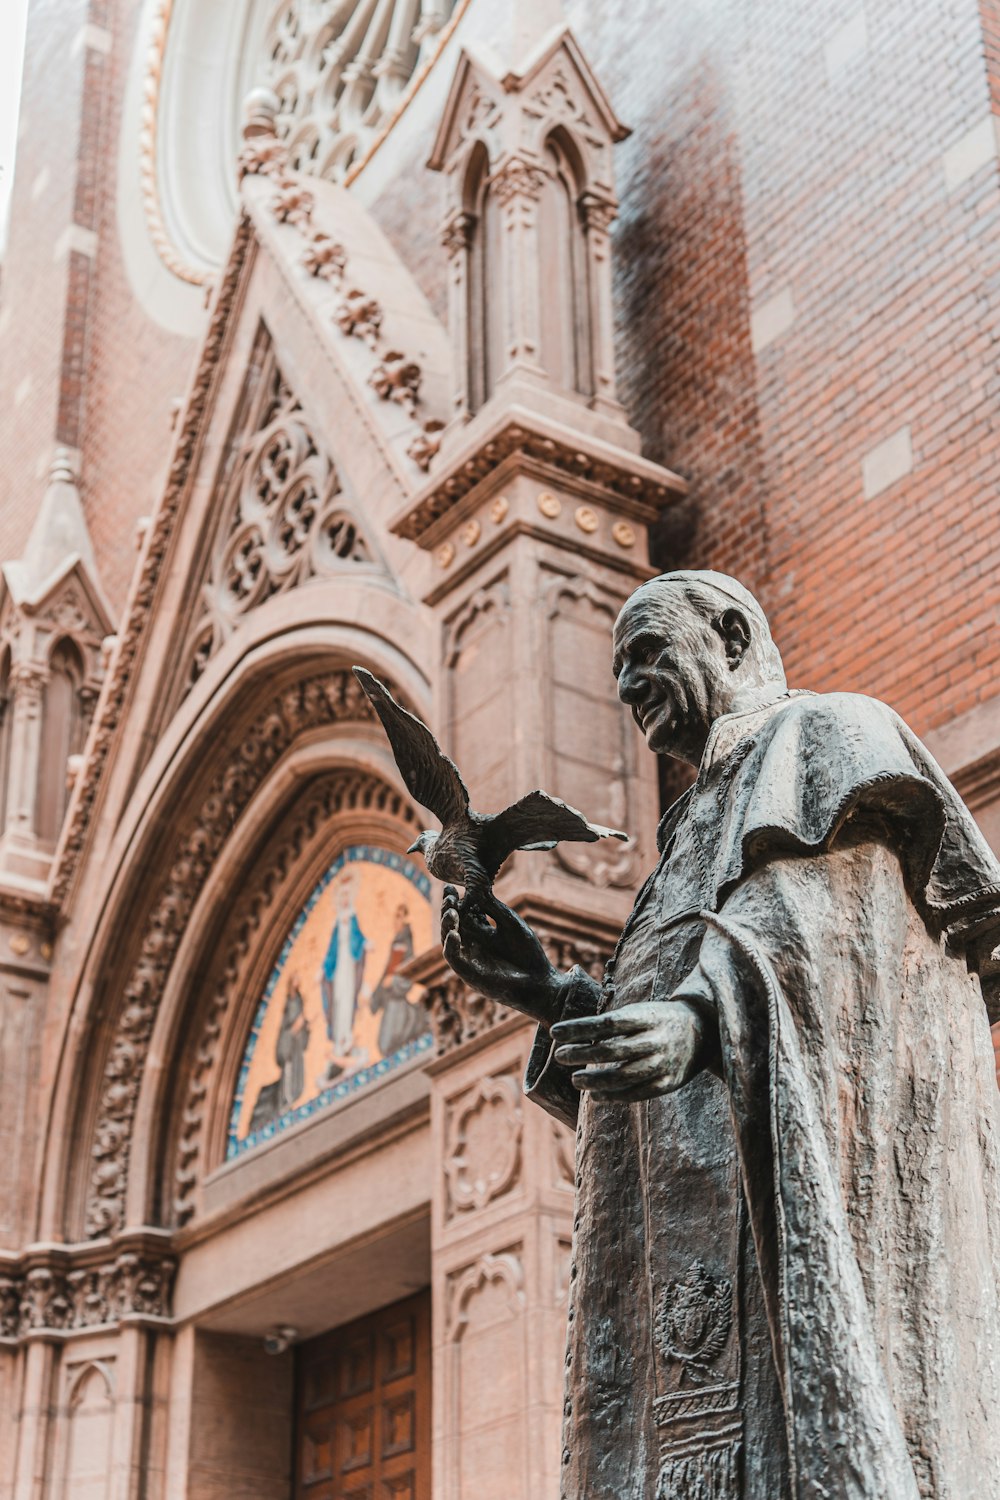 a statue of a man holding a bird in front of a church